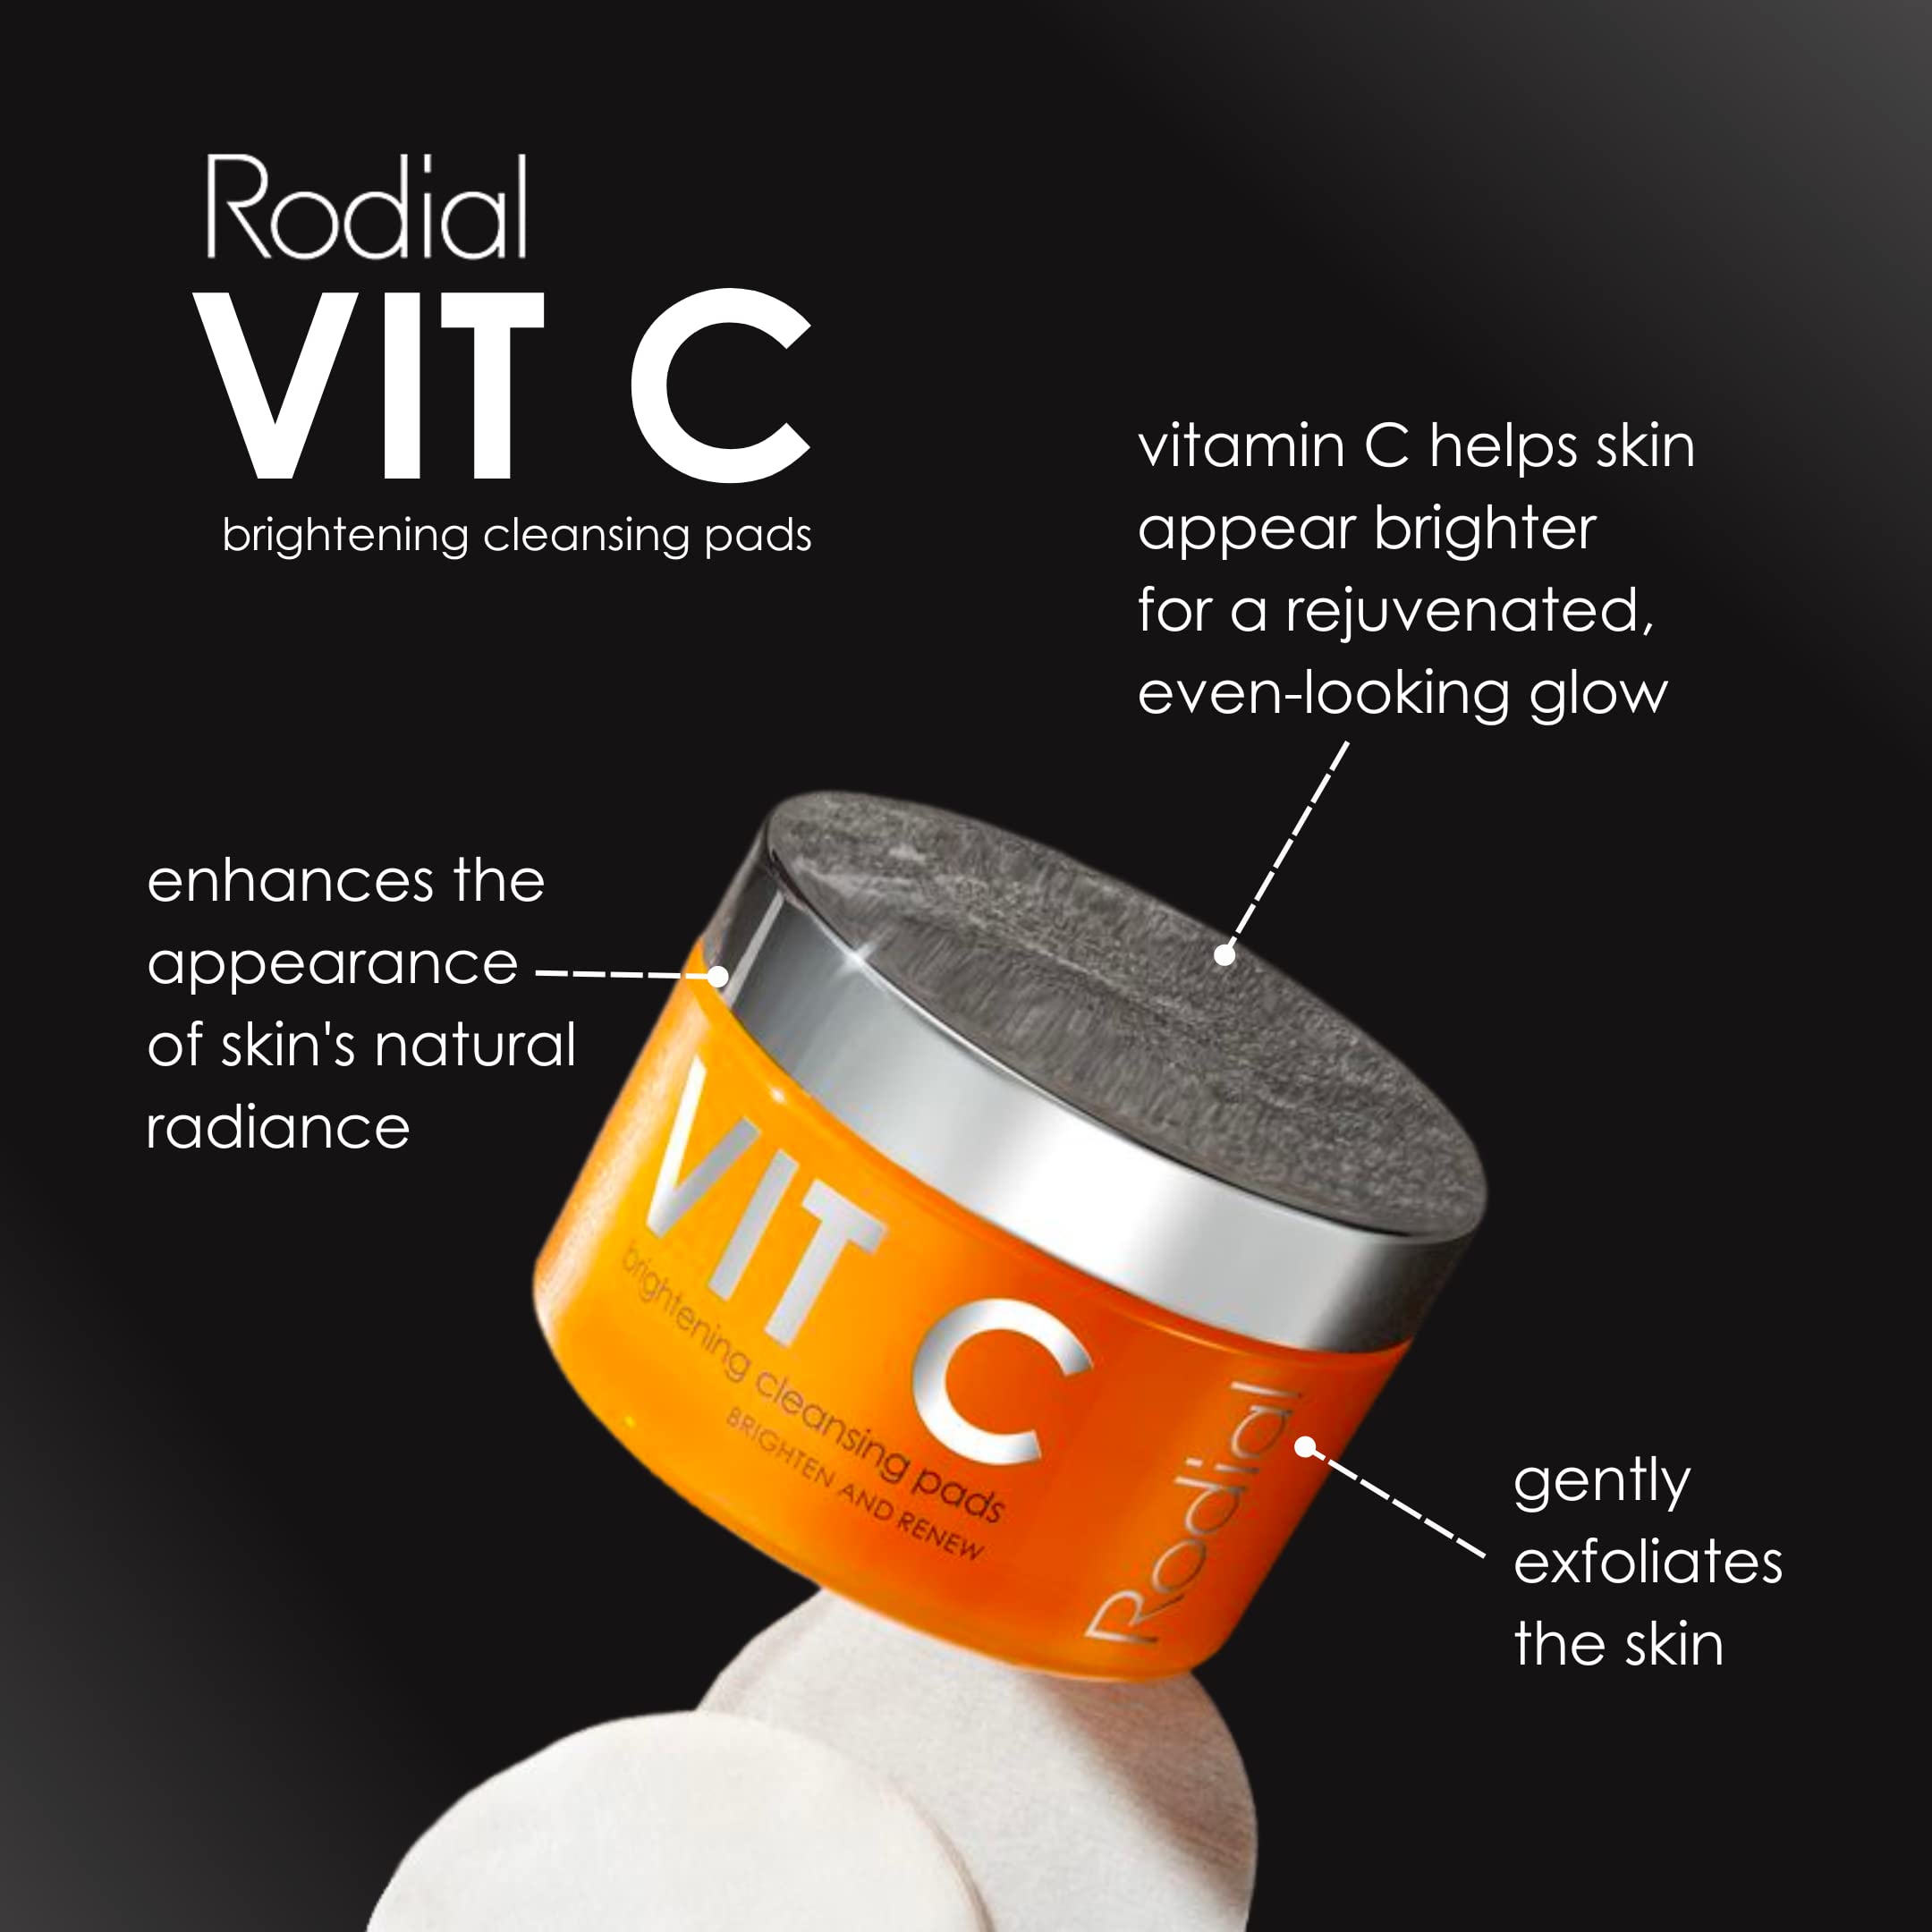 Rodial Vit C Brightening Cleansing Pads - Toning and Purifying Pads, Resurfacing Pads for Day and Night, Vitamin C to Illuminate, AHA Acids to Exfoliate and Salicylic Acid to Tighten Pores